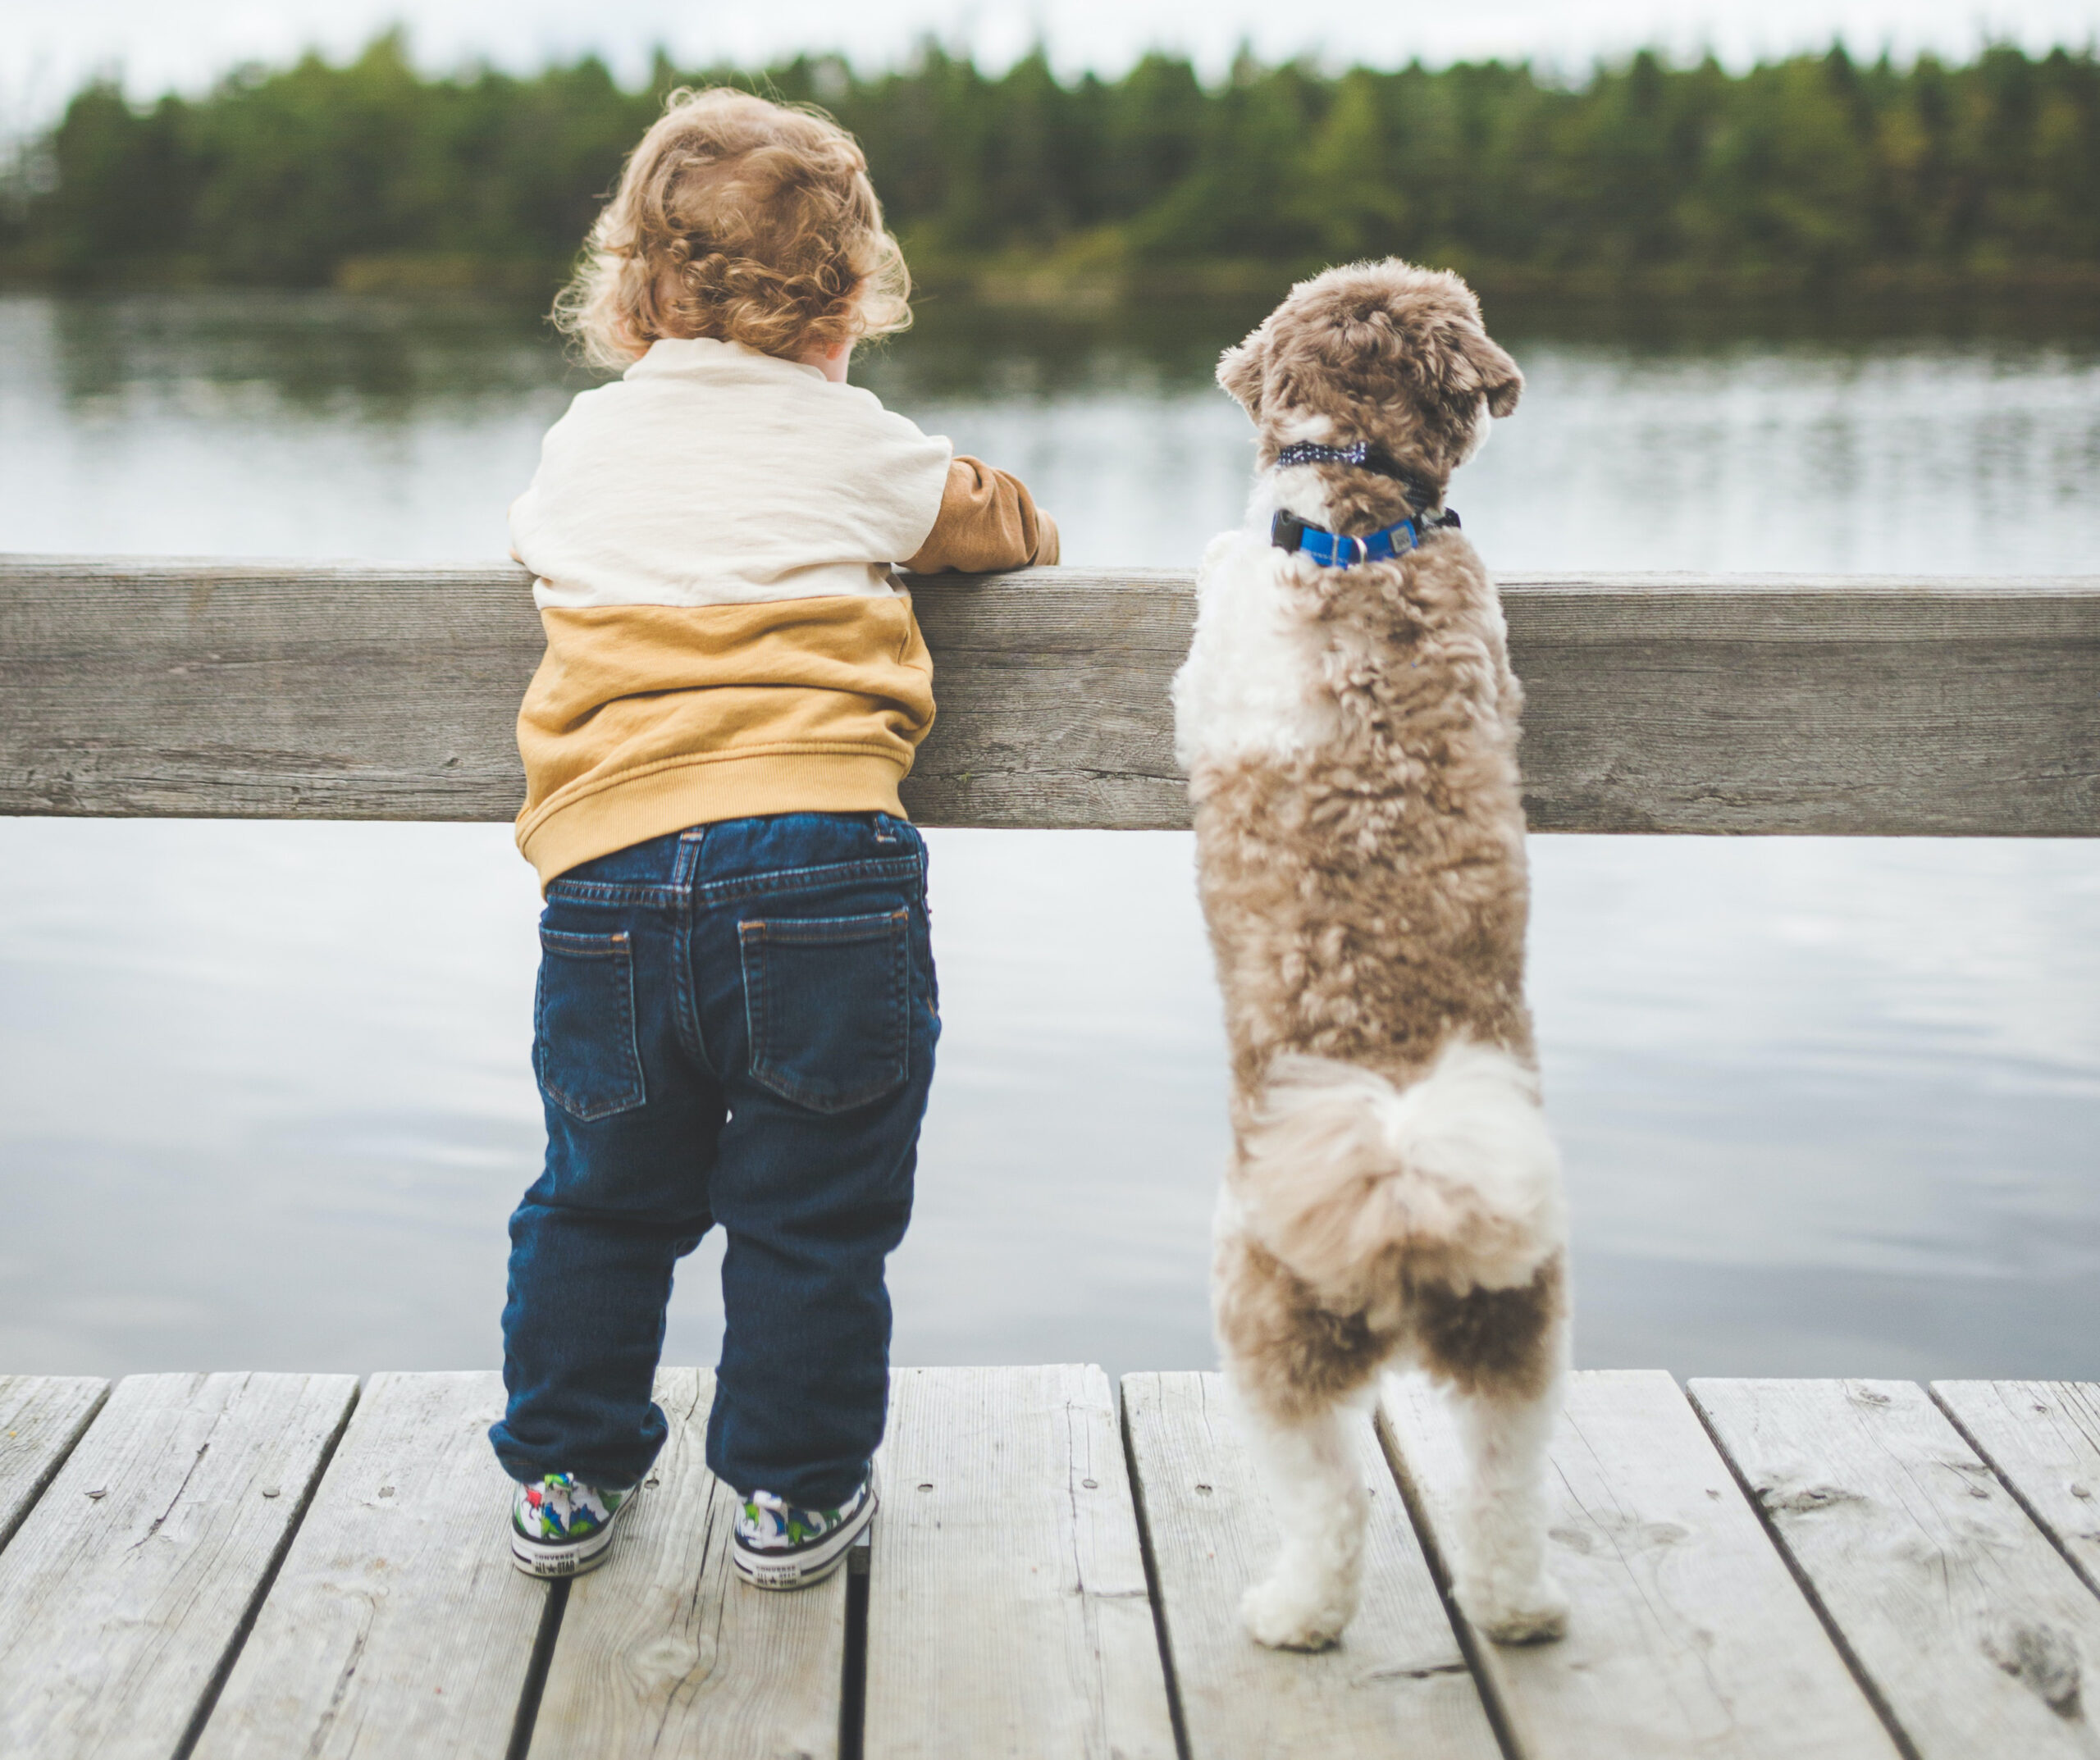 PAWS AND PLAY: THE PROFOUND IMPACT OF PETS ON CHILDREN’S DEVELOPMENT